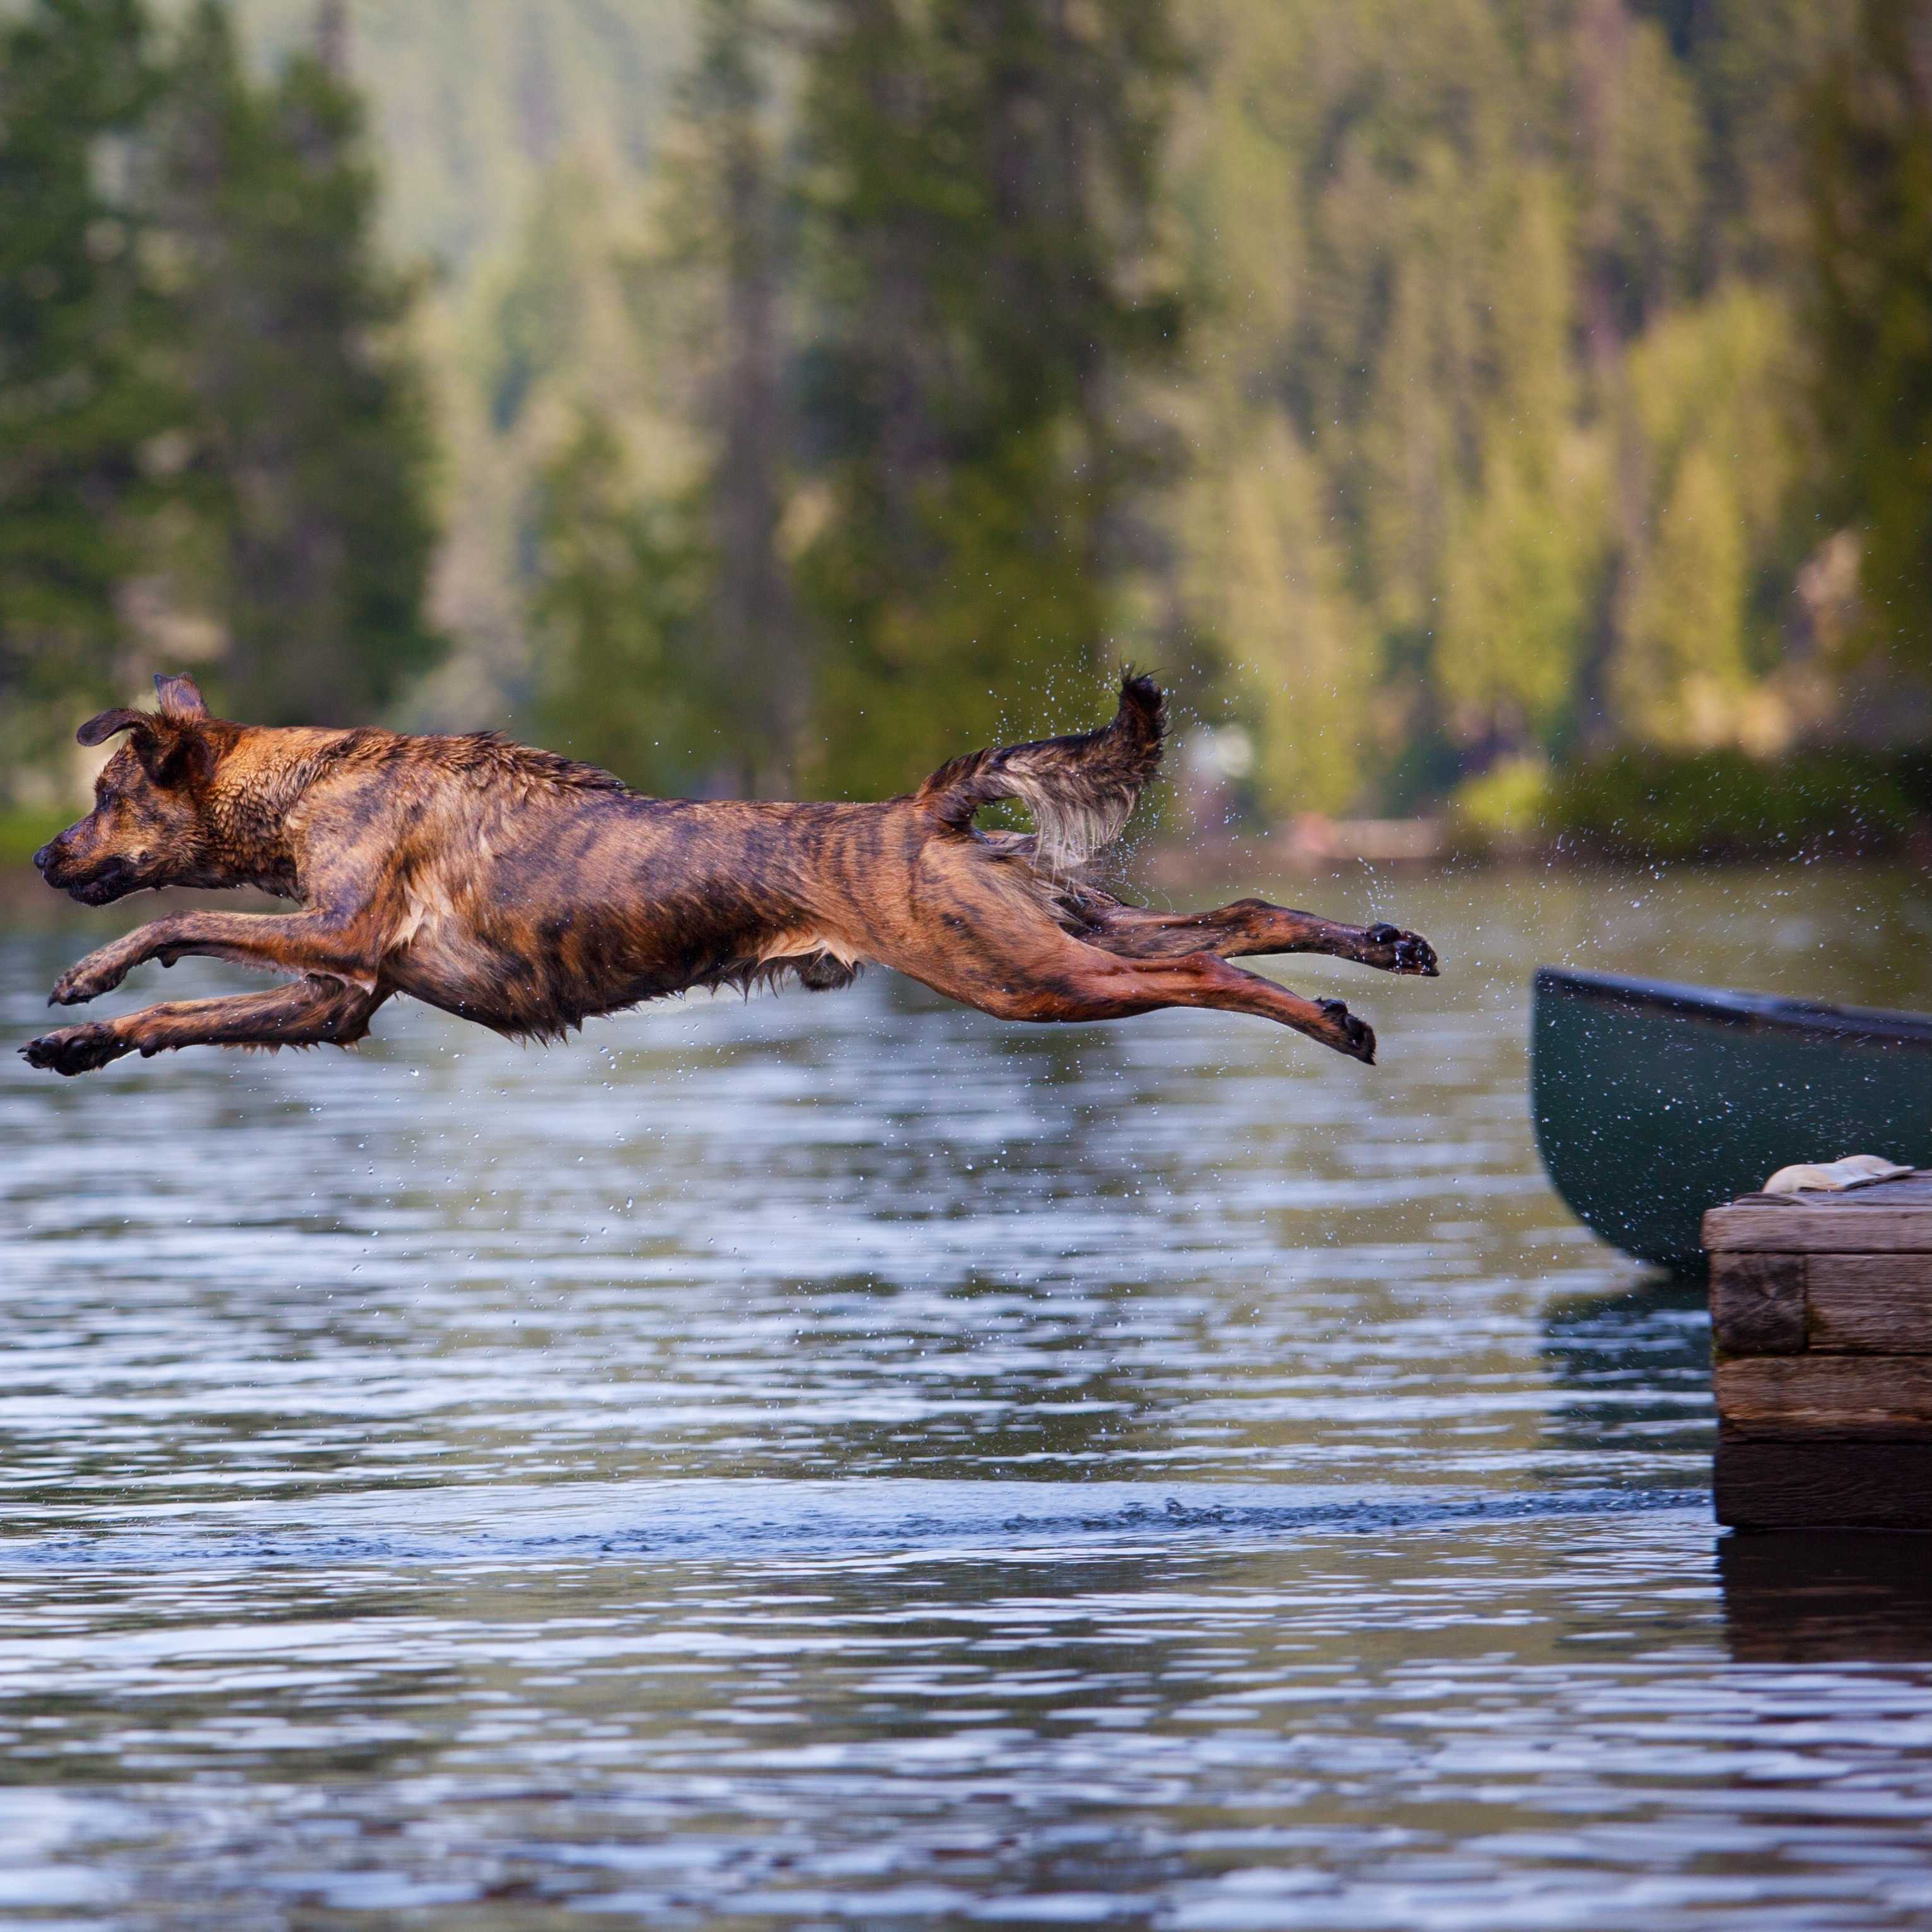 Dog jumping into water.